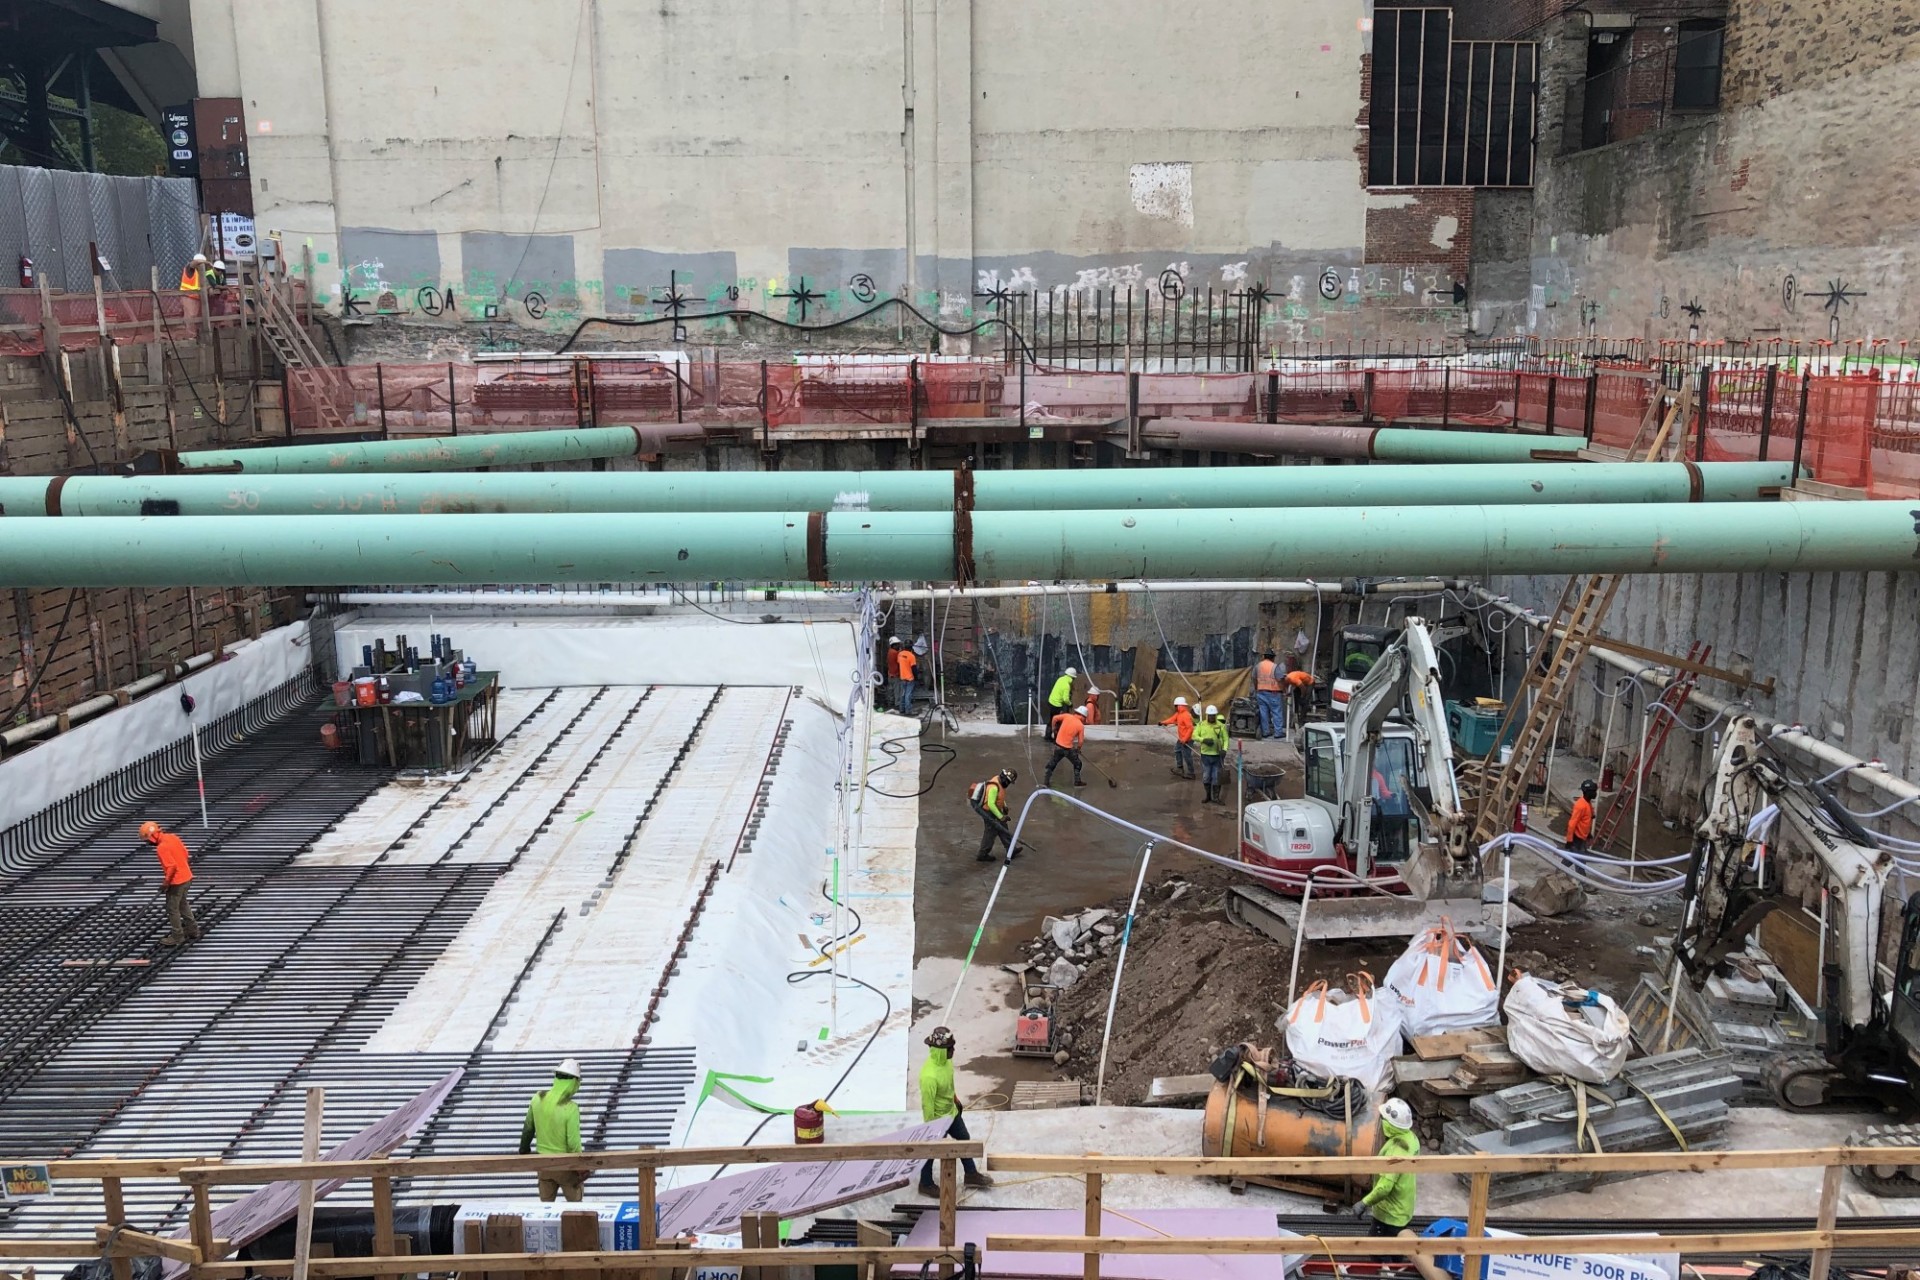 A view of the construction site from the ground level with white, thick panels of waterproofing on the left side, and large green pipes running overhead.